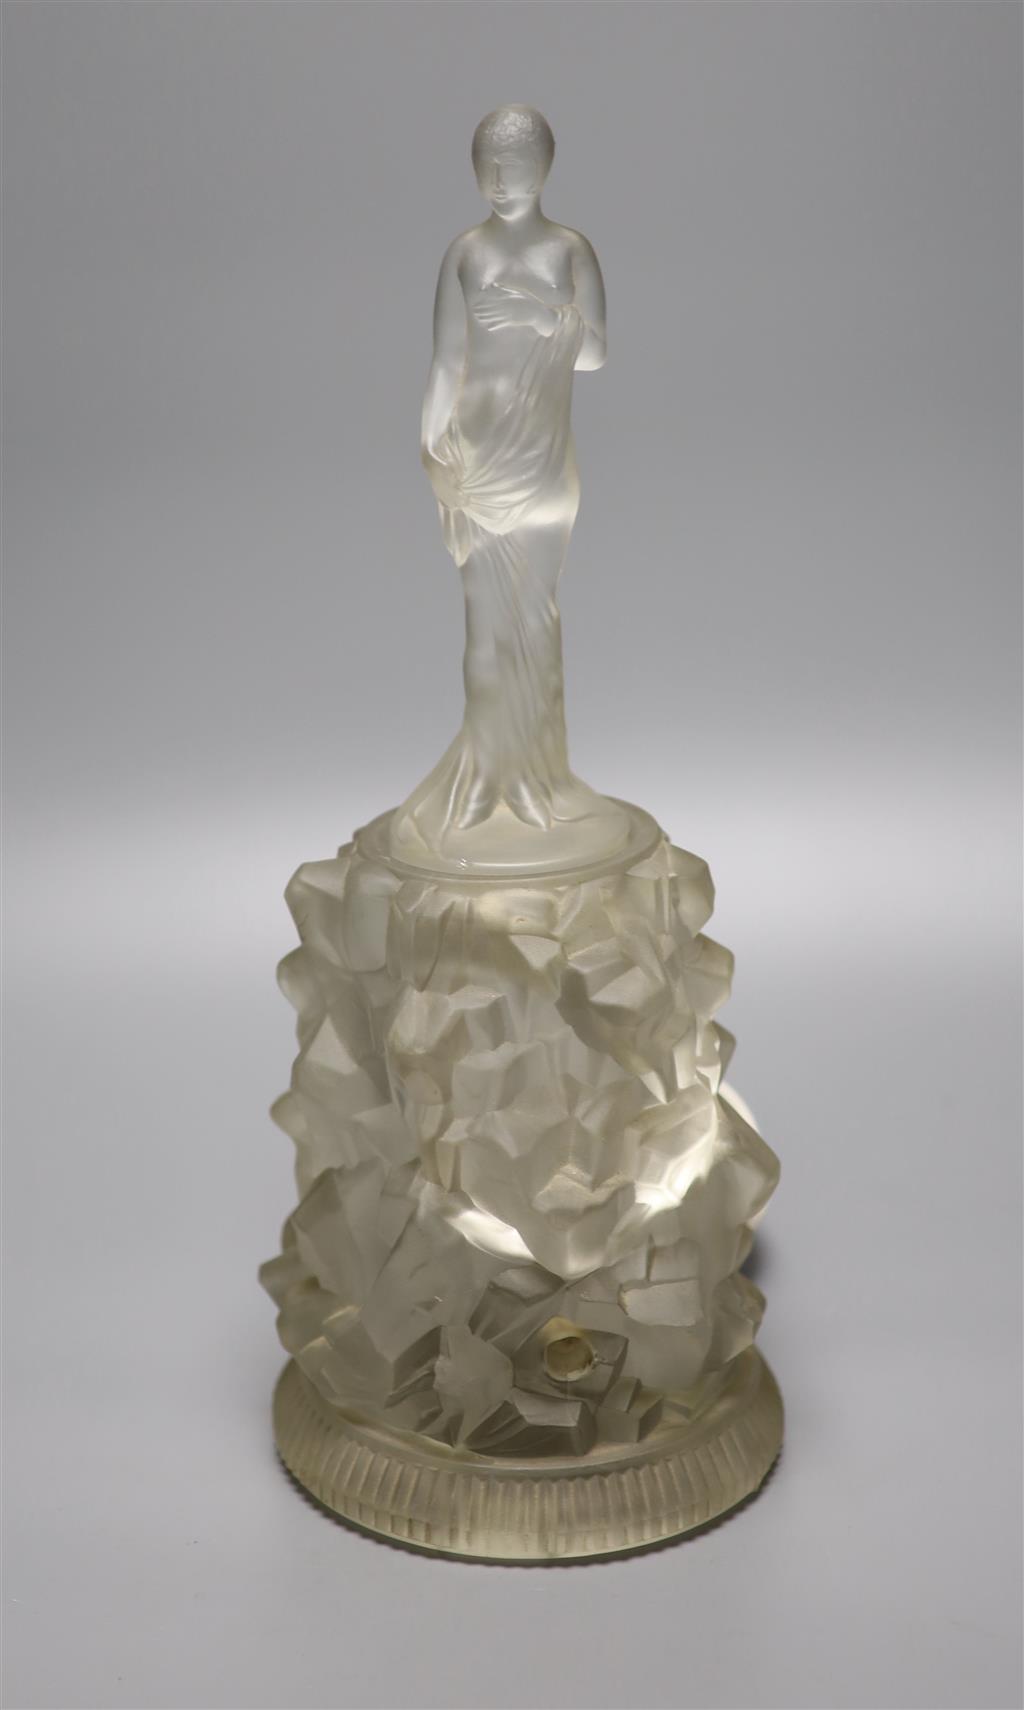 An Art Deco moulded glass figure on an illuminated glass stand